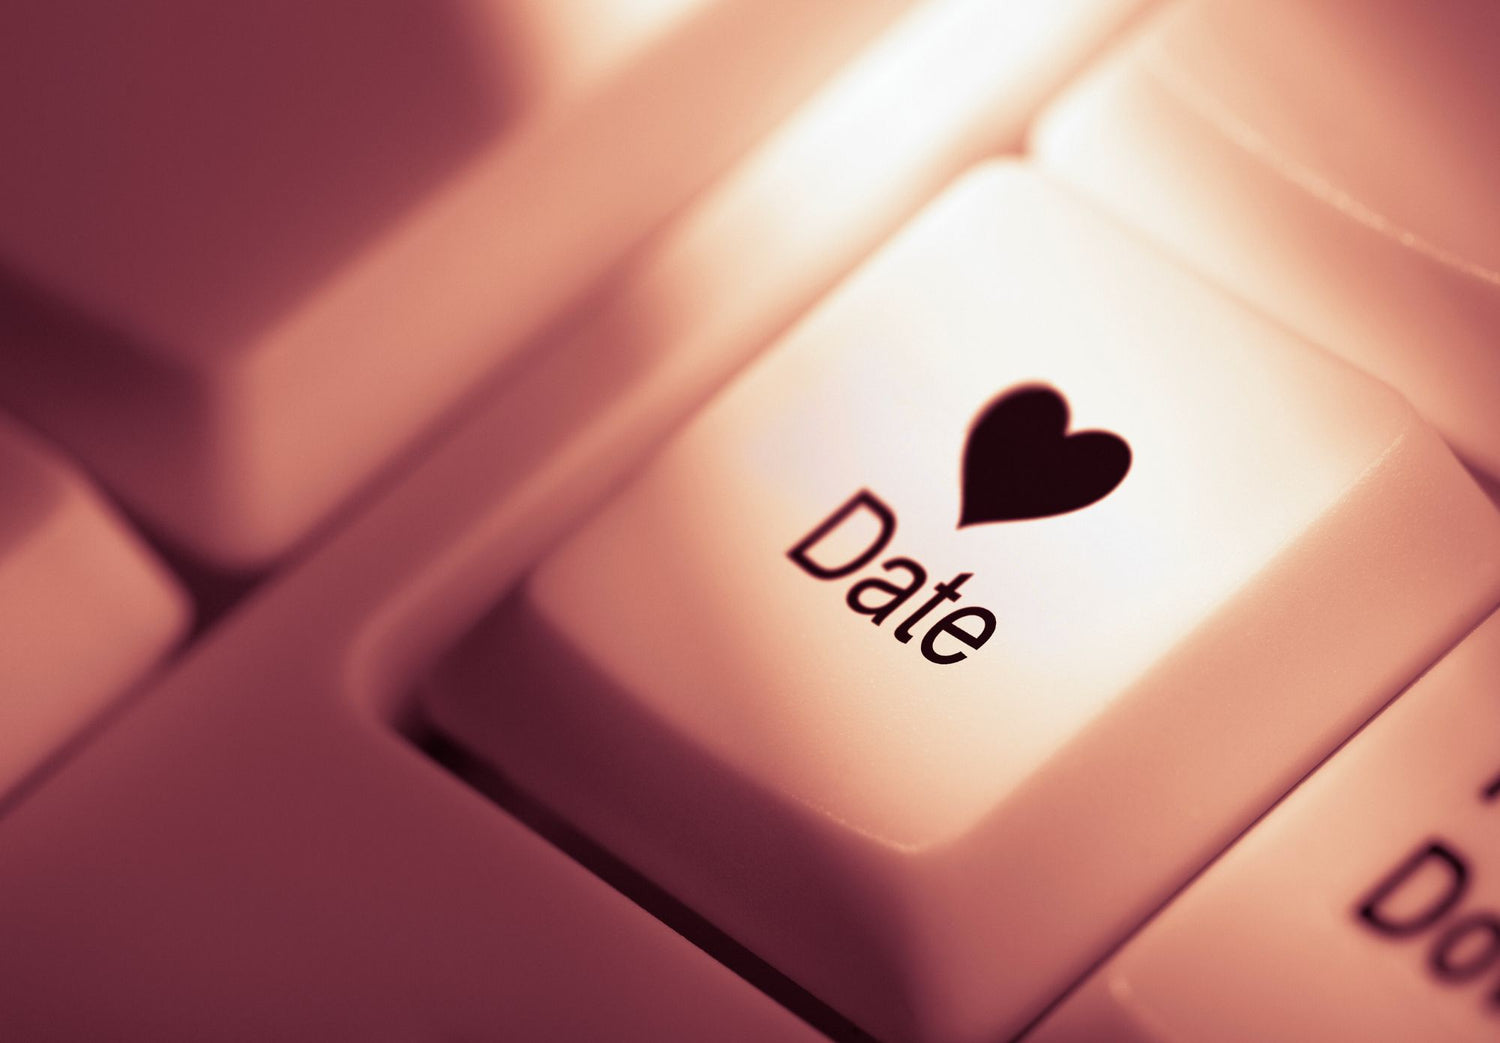 Dating with Intention to Find Your Special Someone